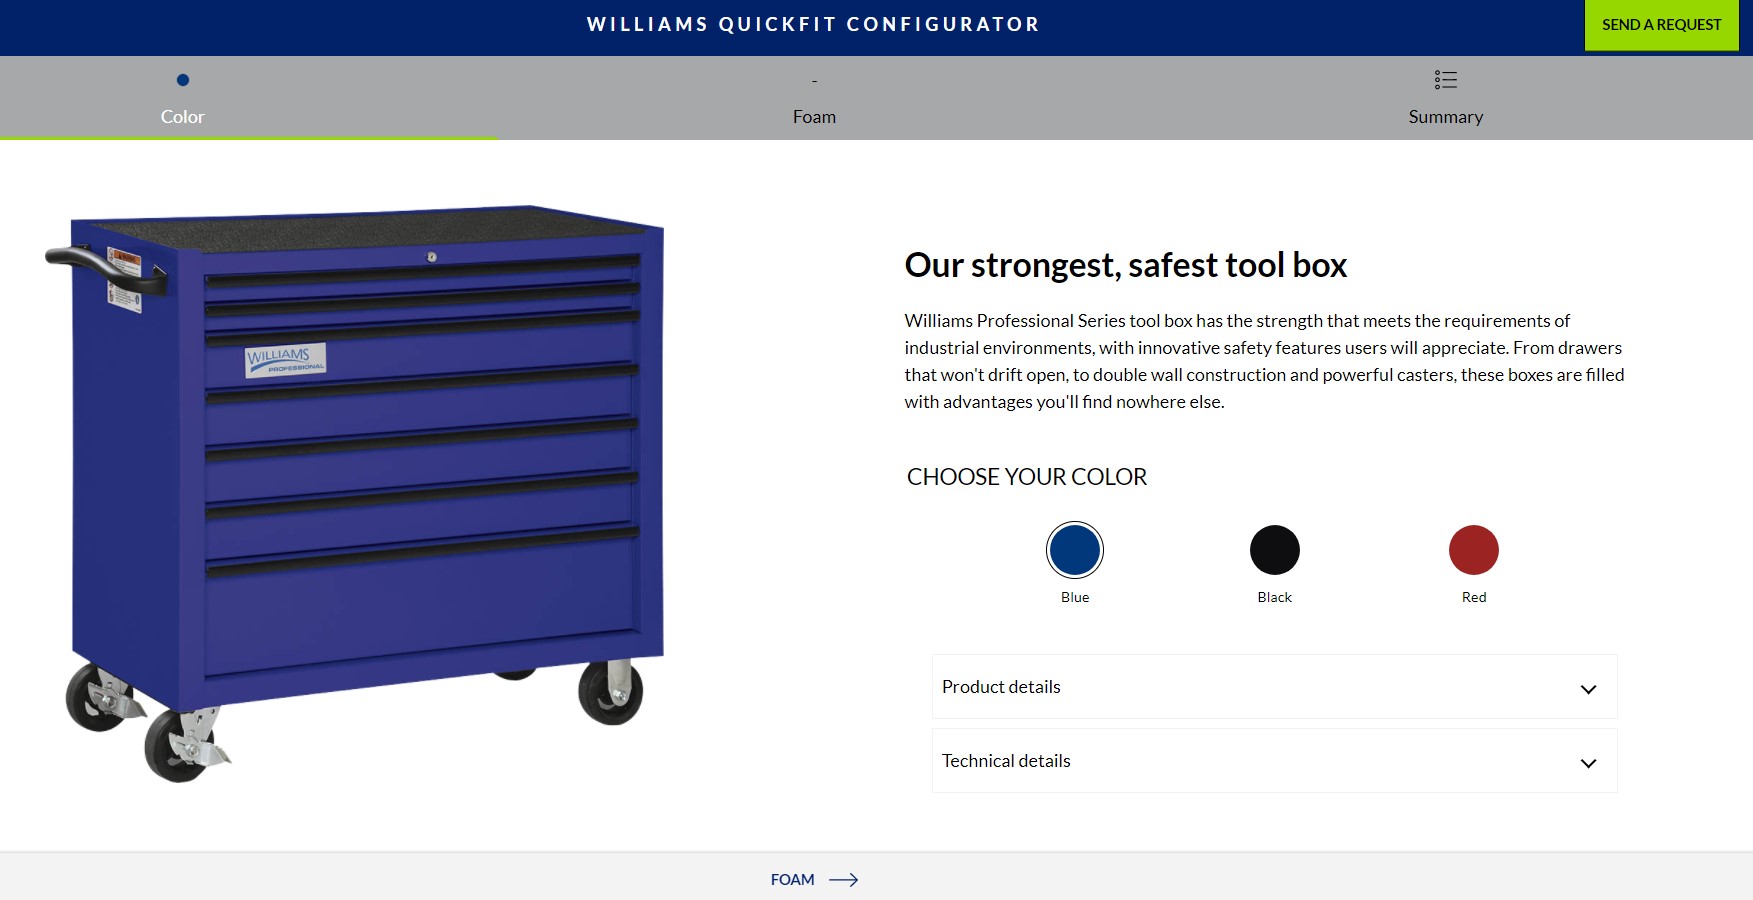 GAIN A HIGHER LEVEL OF EFFICIENCY WITH THE NEW WILLIAMS® QUICKFIT TOOL ORGANIZATION SYSTEM